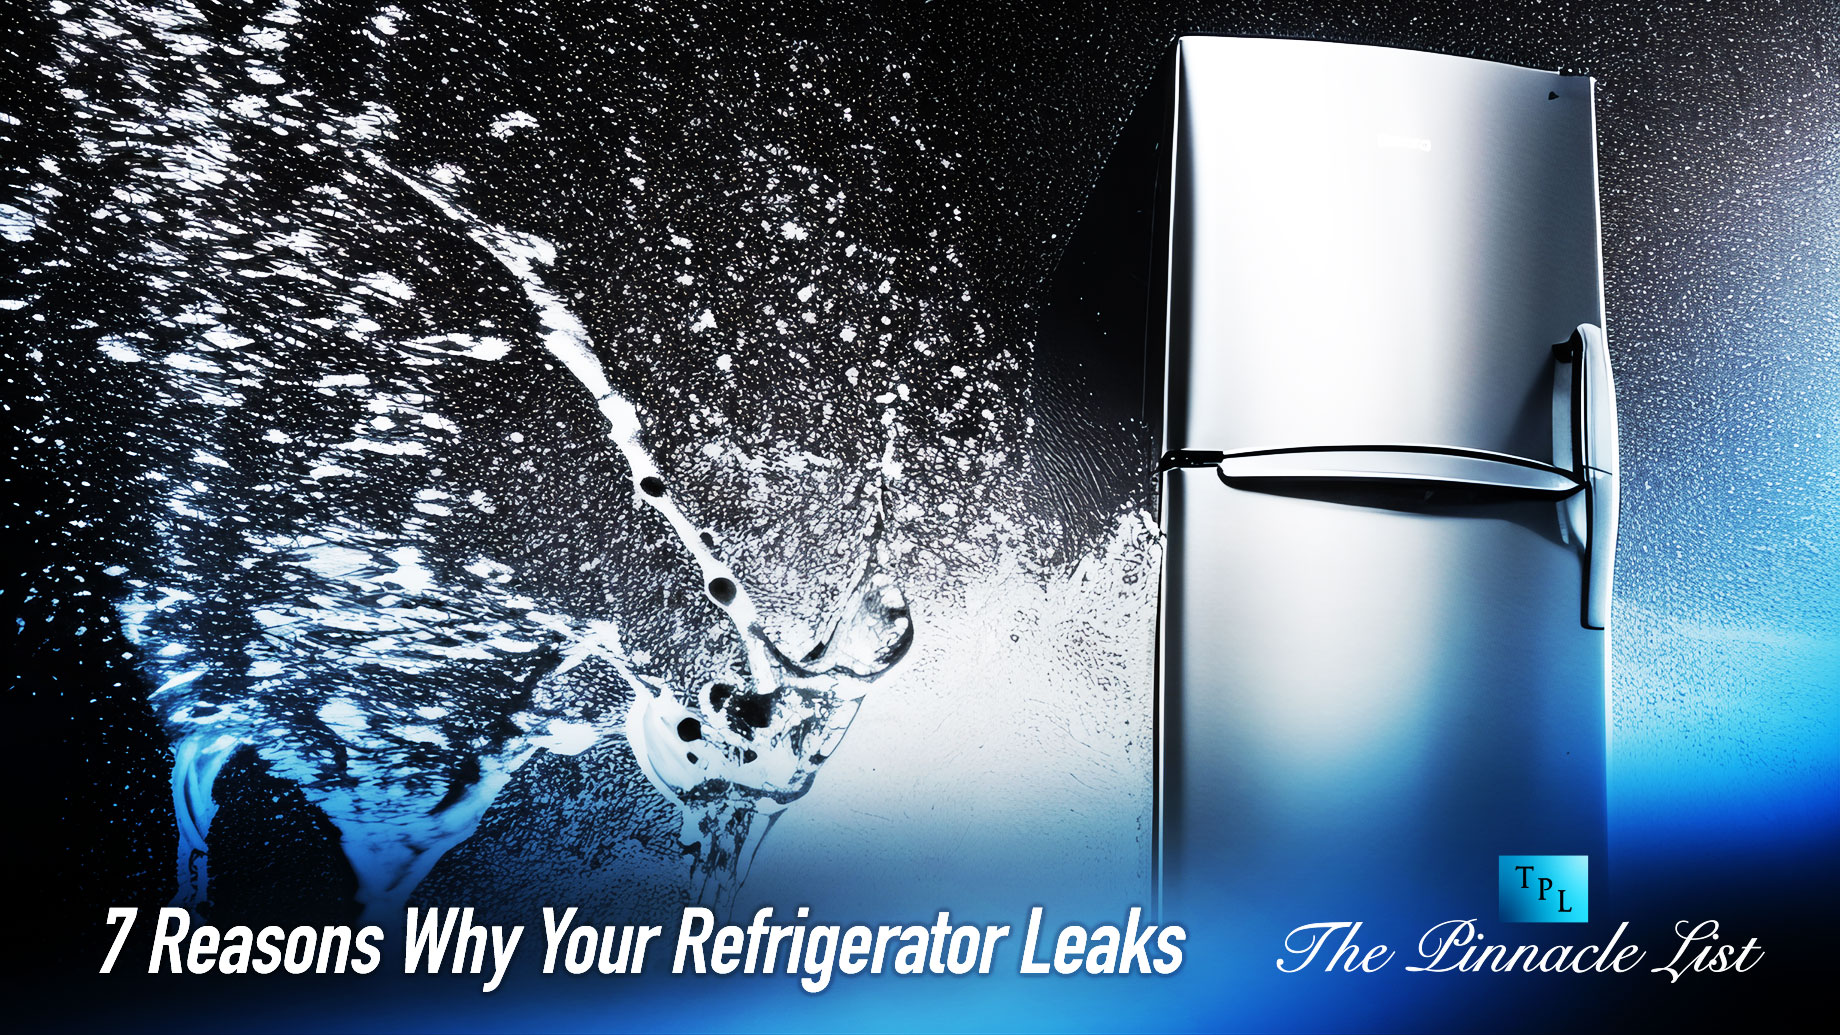 7 Reasons Why Your Refrigerator Leaks